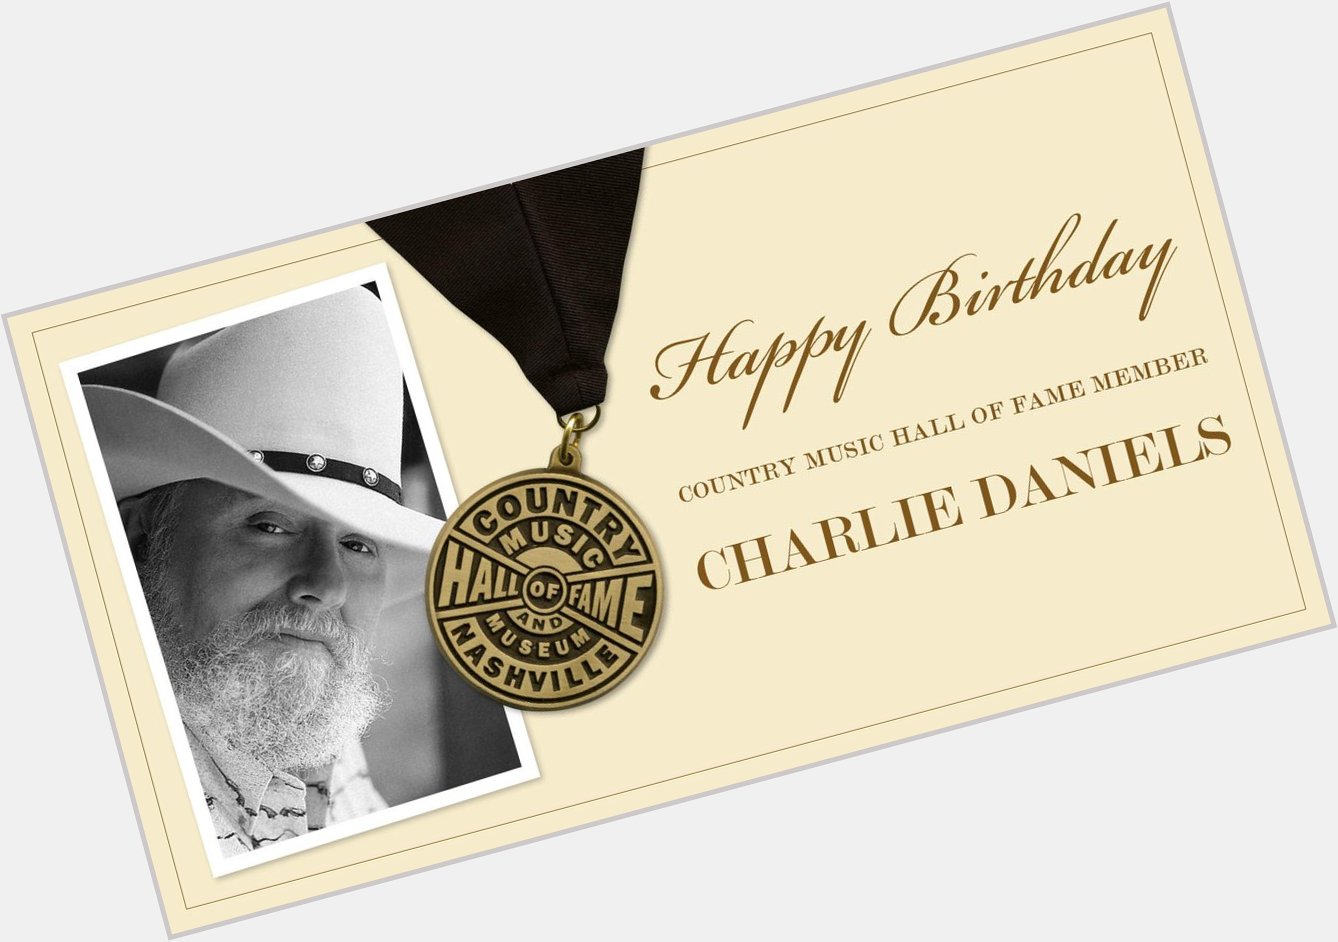 Help us wish Country Music Hall of Fame member Charlie Daniels a very Happy Birthday! 